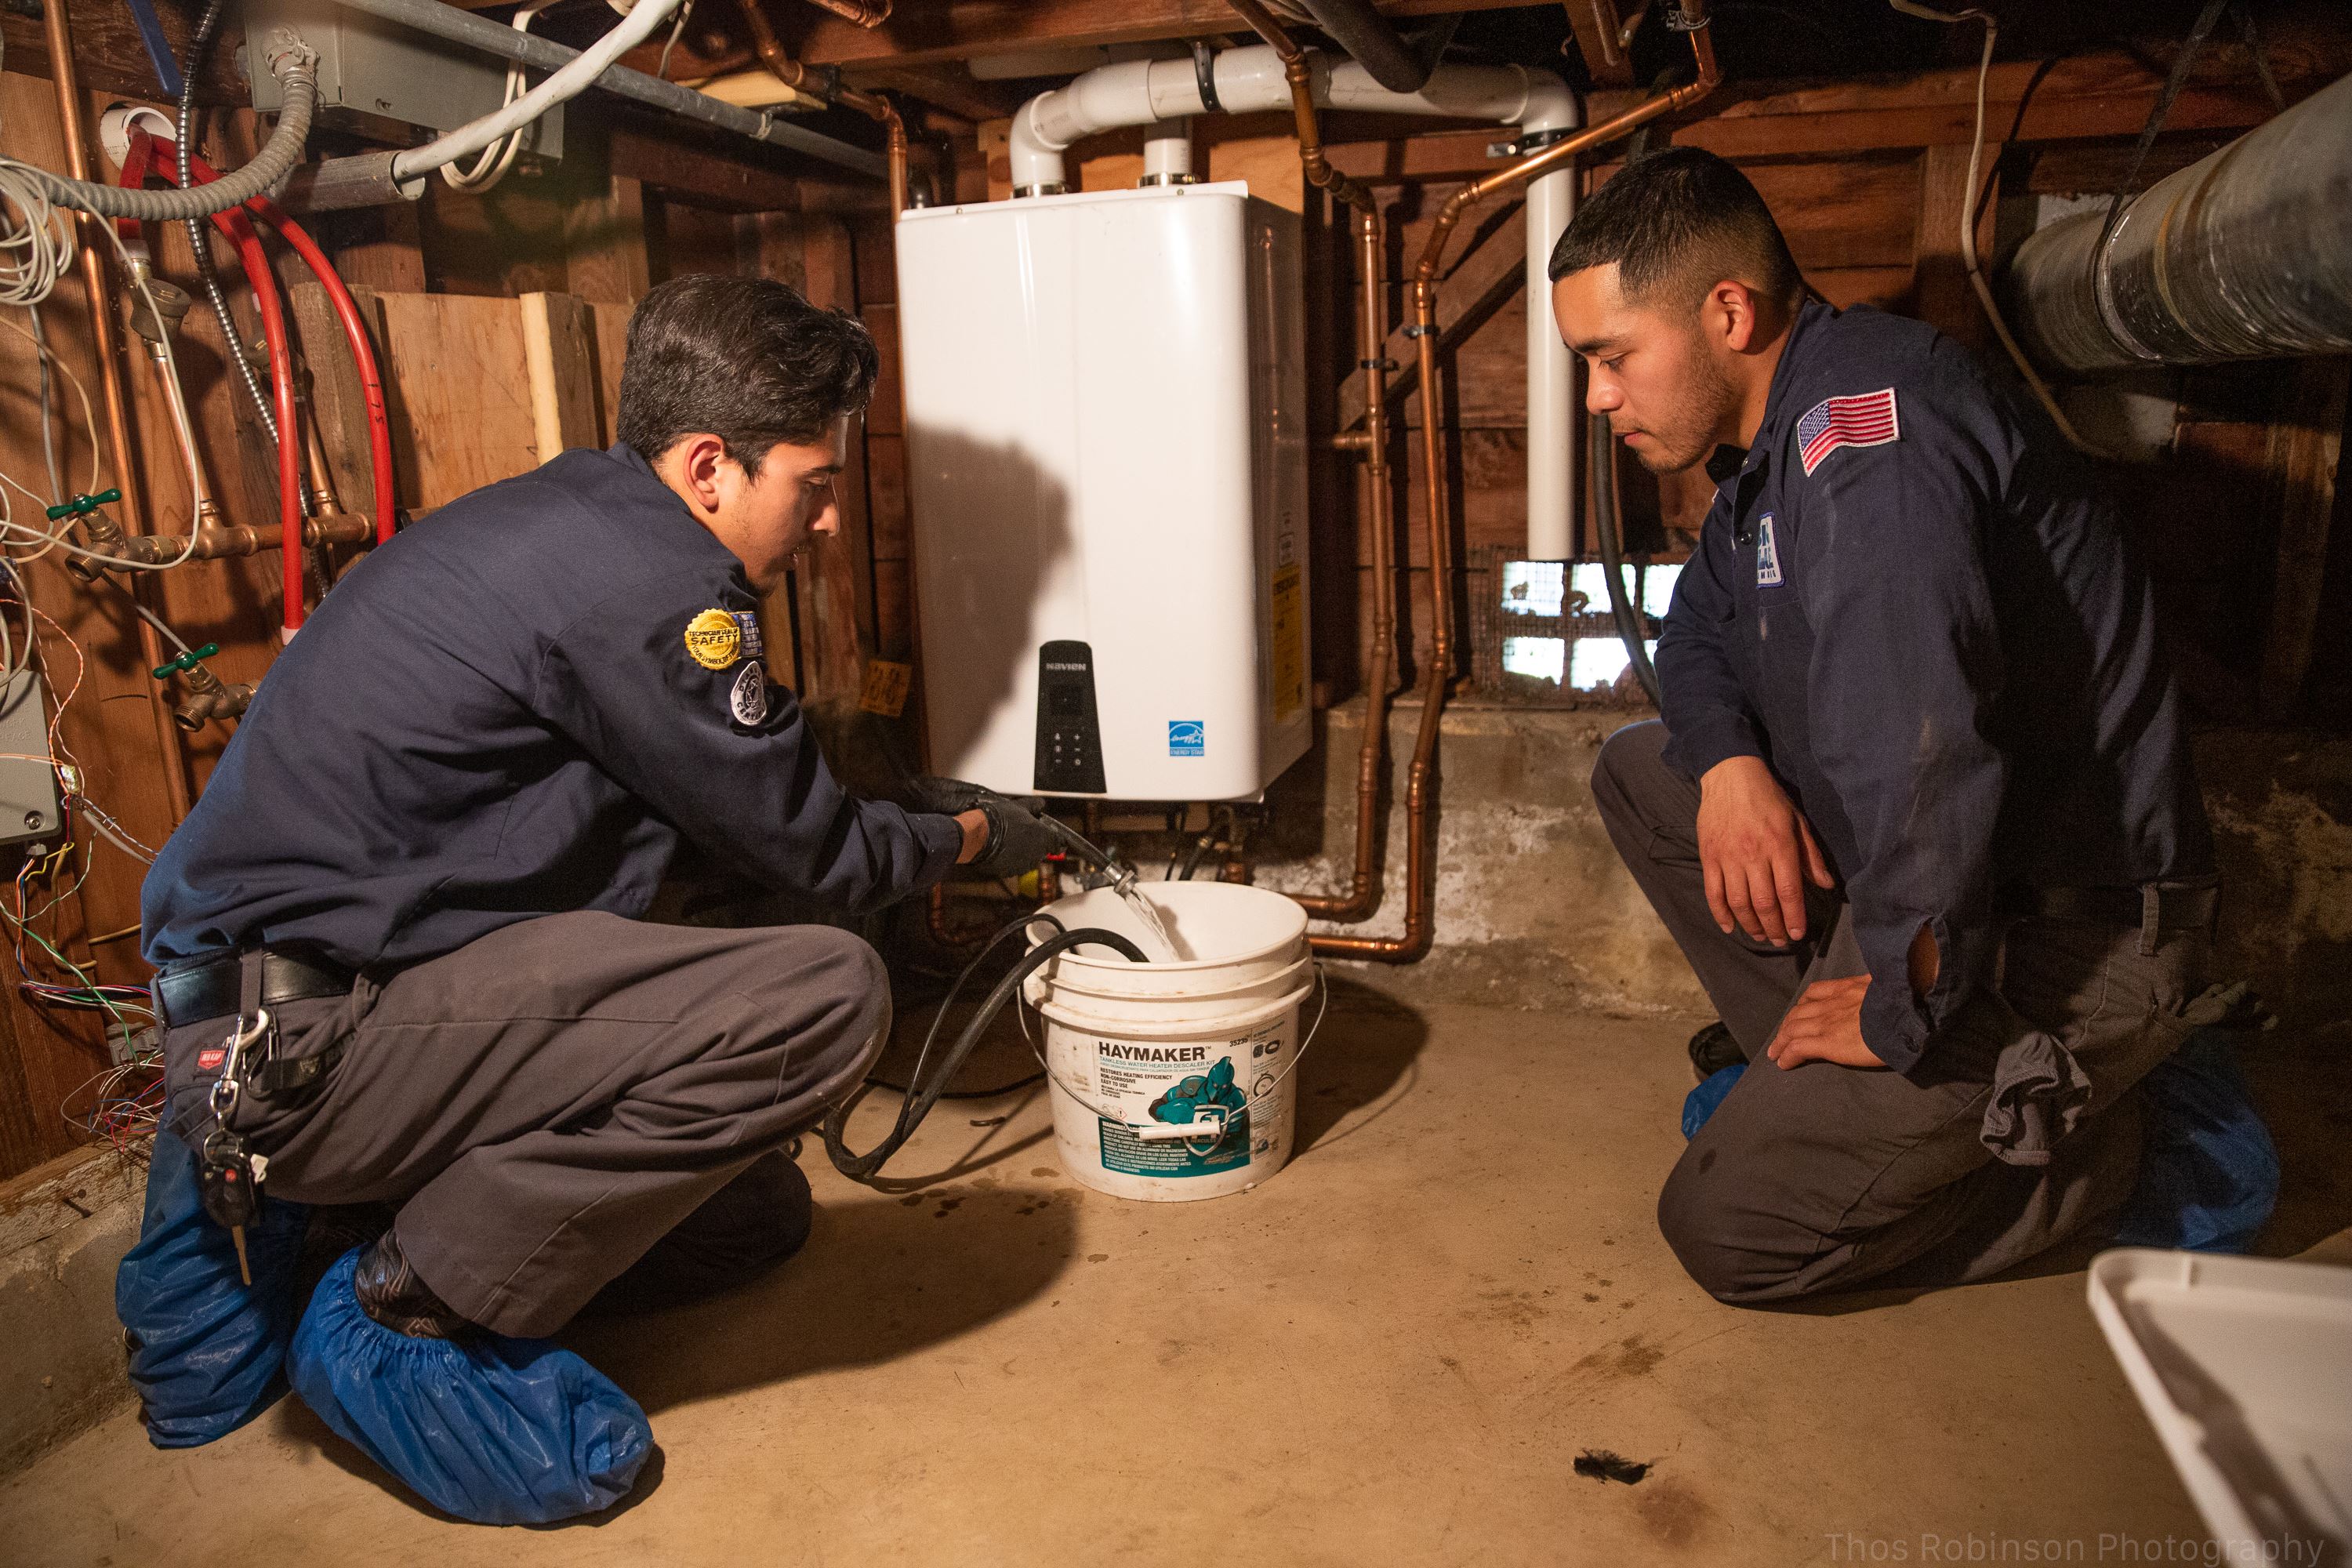 expert water heater repair from technicians in the Oakland area